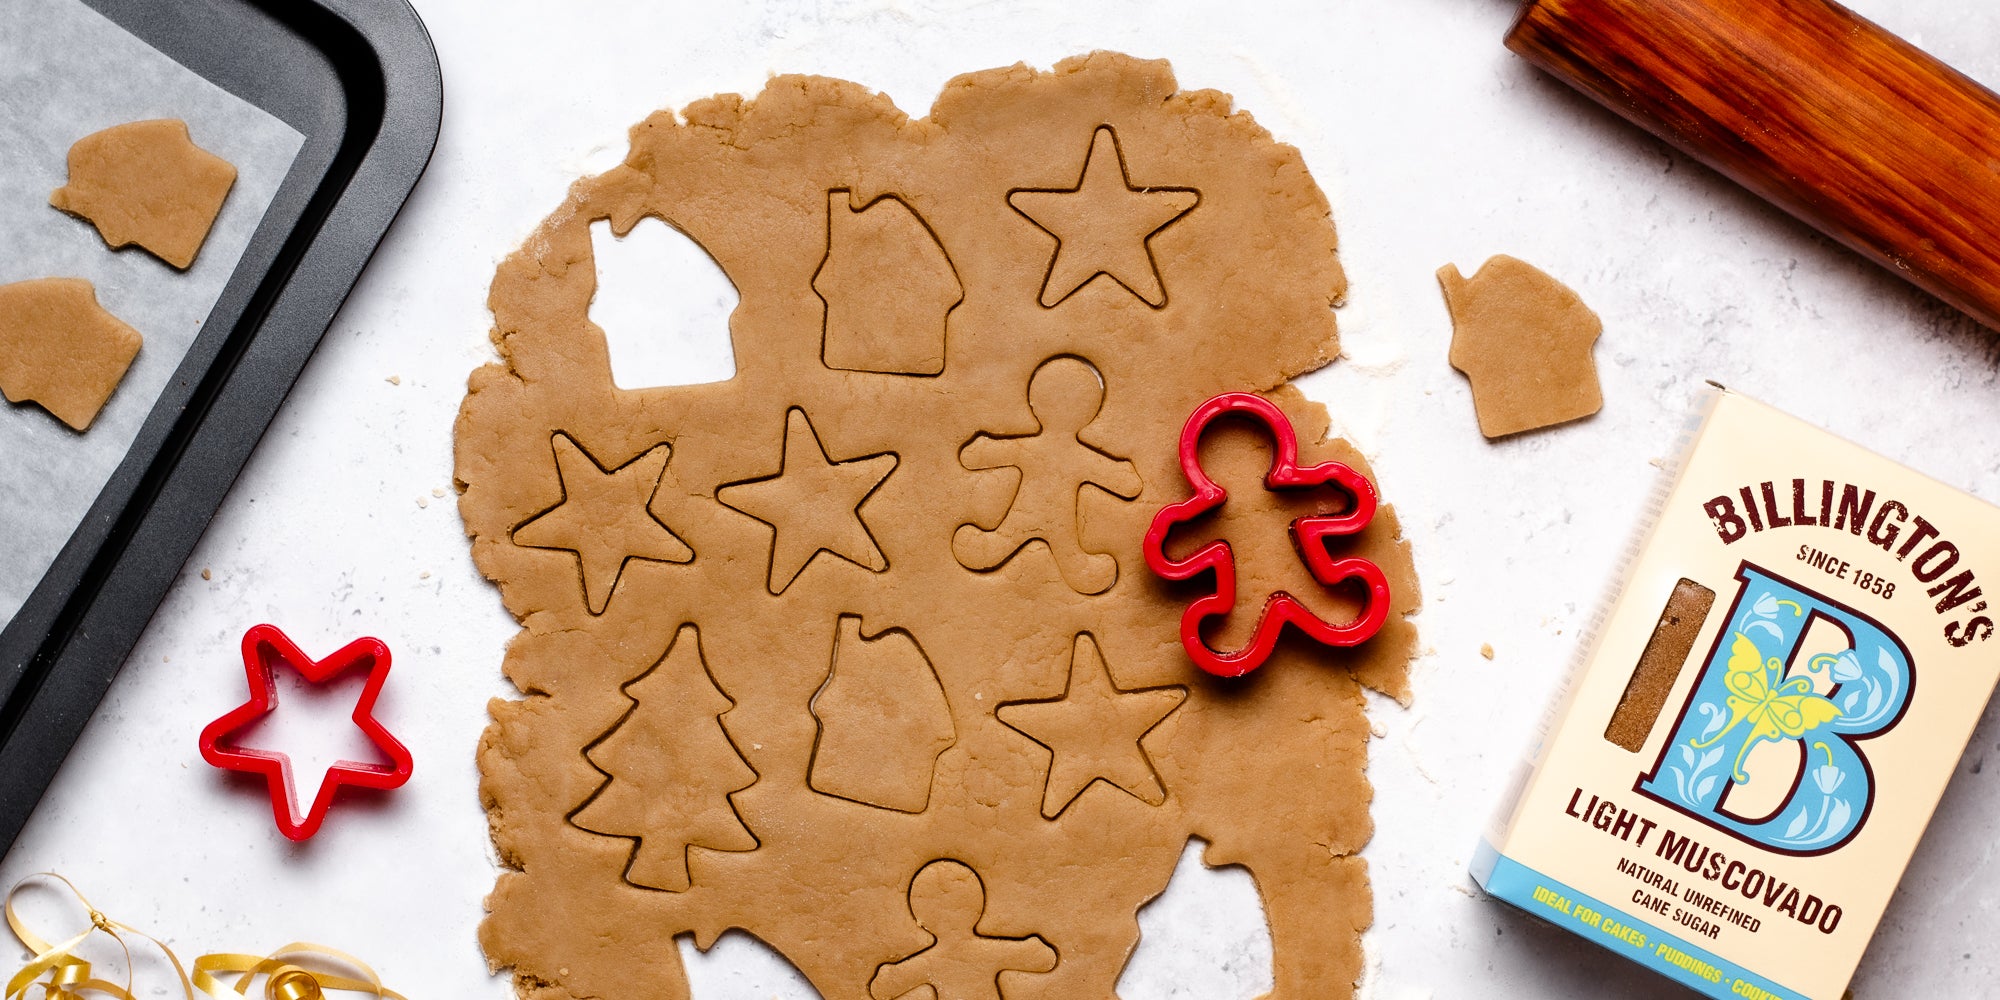 Top down view of a gingerbread man cookie cutter cutting out vegan gingerbread dough